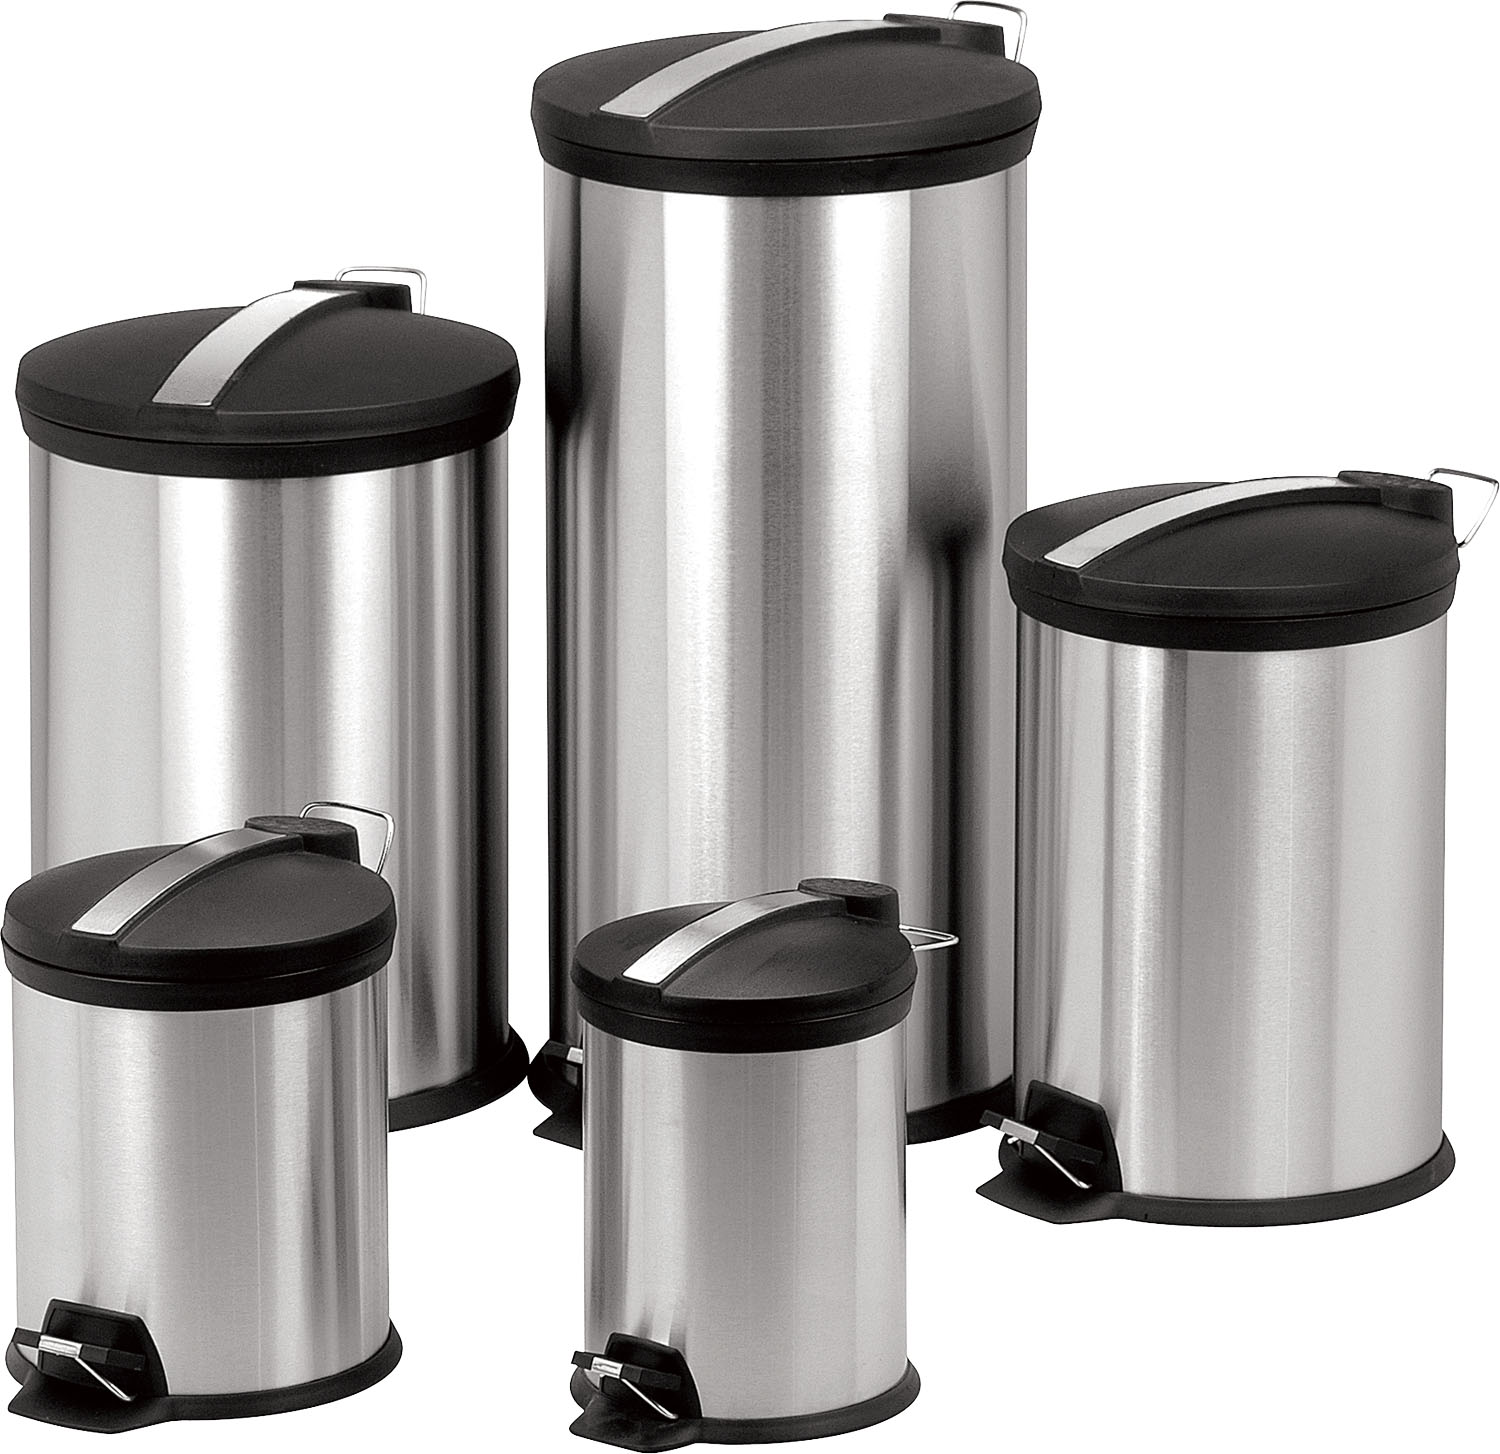 Stainless Steel Bin with Plastic Lid